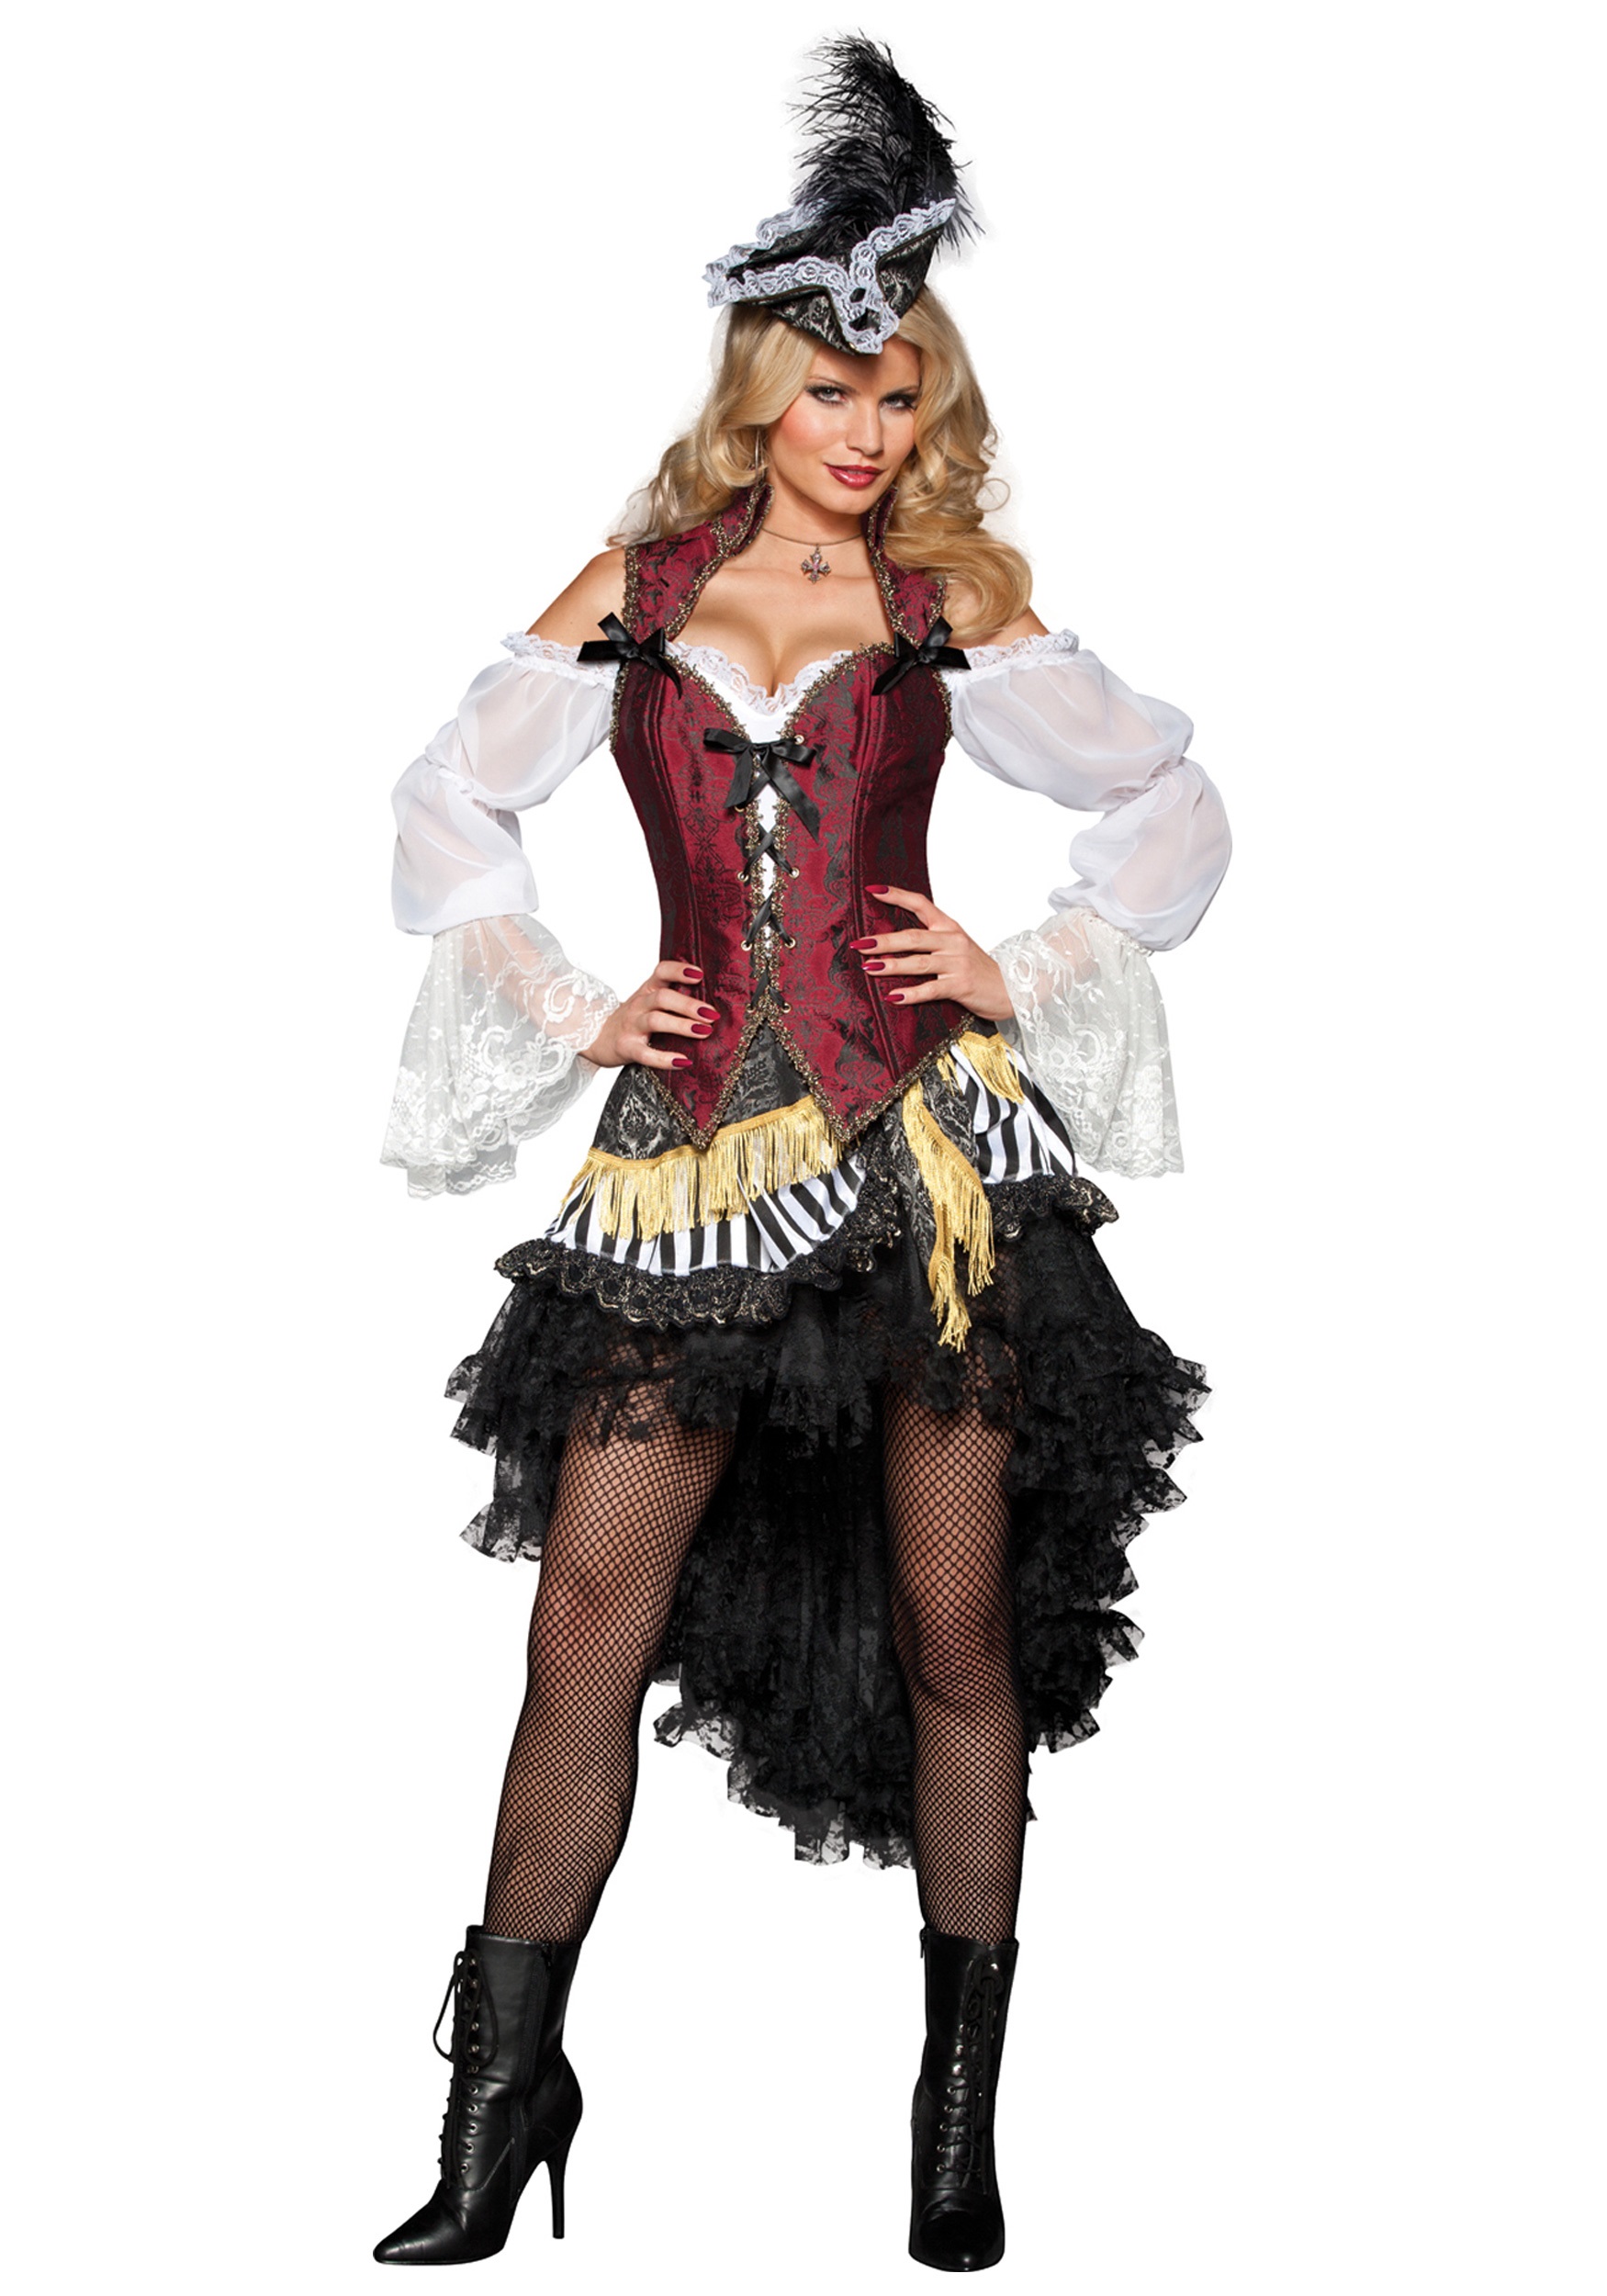 Sexy High Seas Pirate Costume Free Download Nude Photo Gallery 4786